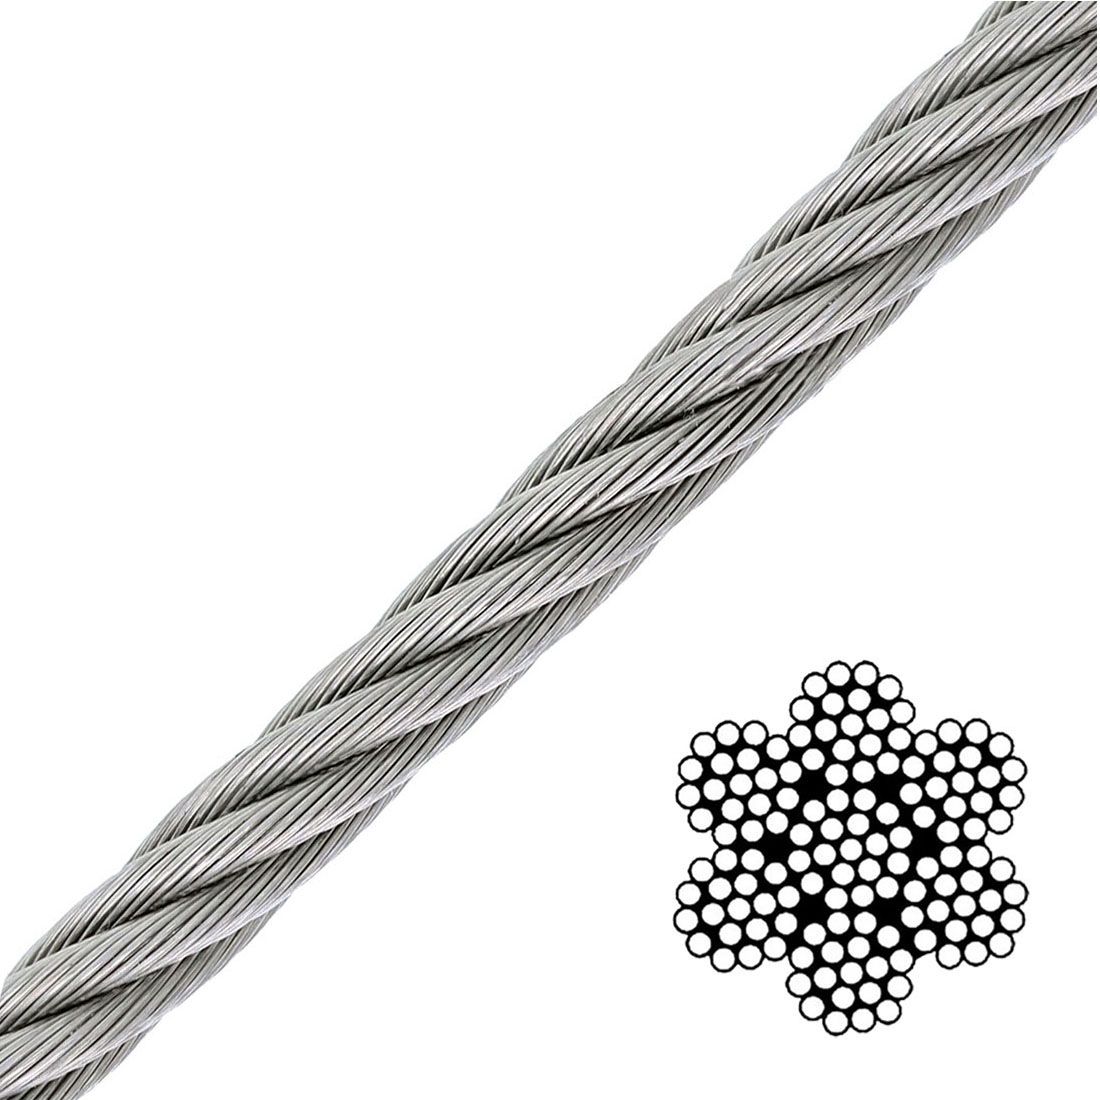 1/4" x 500 ft.(reel) Aircraft Cable 7 x 19 Galvanized Steel Fine Quality 1